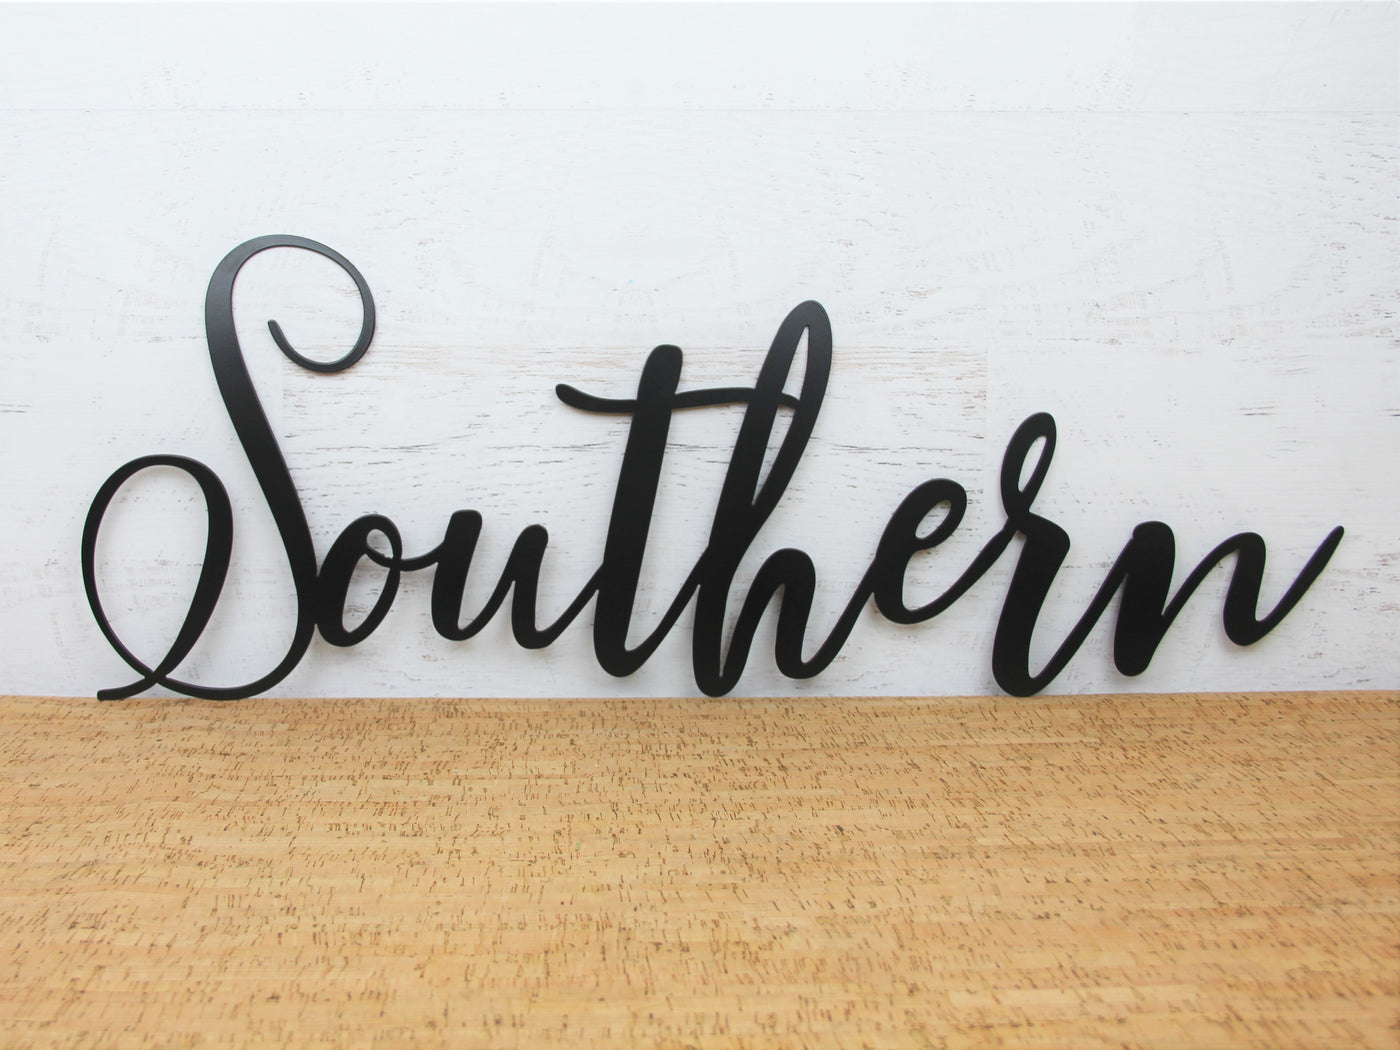 Southern Metal Word Sign - Madison Iron and Wood - Metal Art - metal outdoor decor - Steel deocrations - american made products - veteran owned business products - fencing decorations - fencing supplies - custom wall decorations - personalized wall signs - steel - decorative post caps - steel post caps - metal post caps - brackets - structural brackets - home improvement - easter - easter decorations - easter gift - easter yard decor